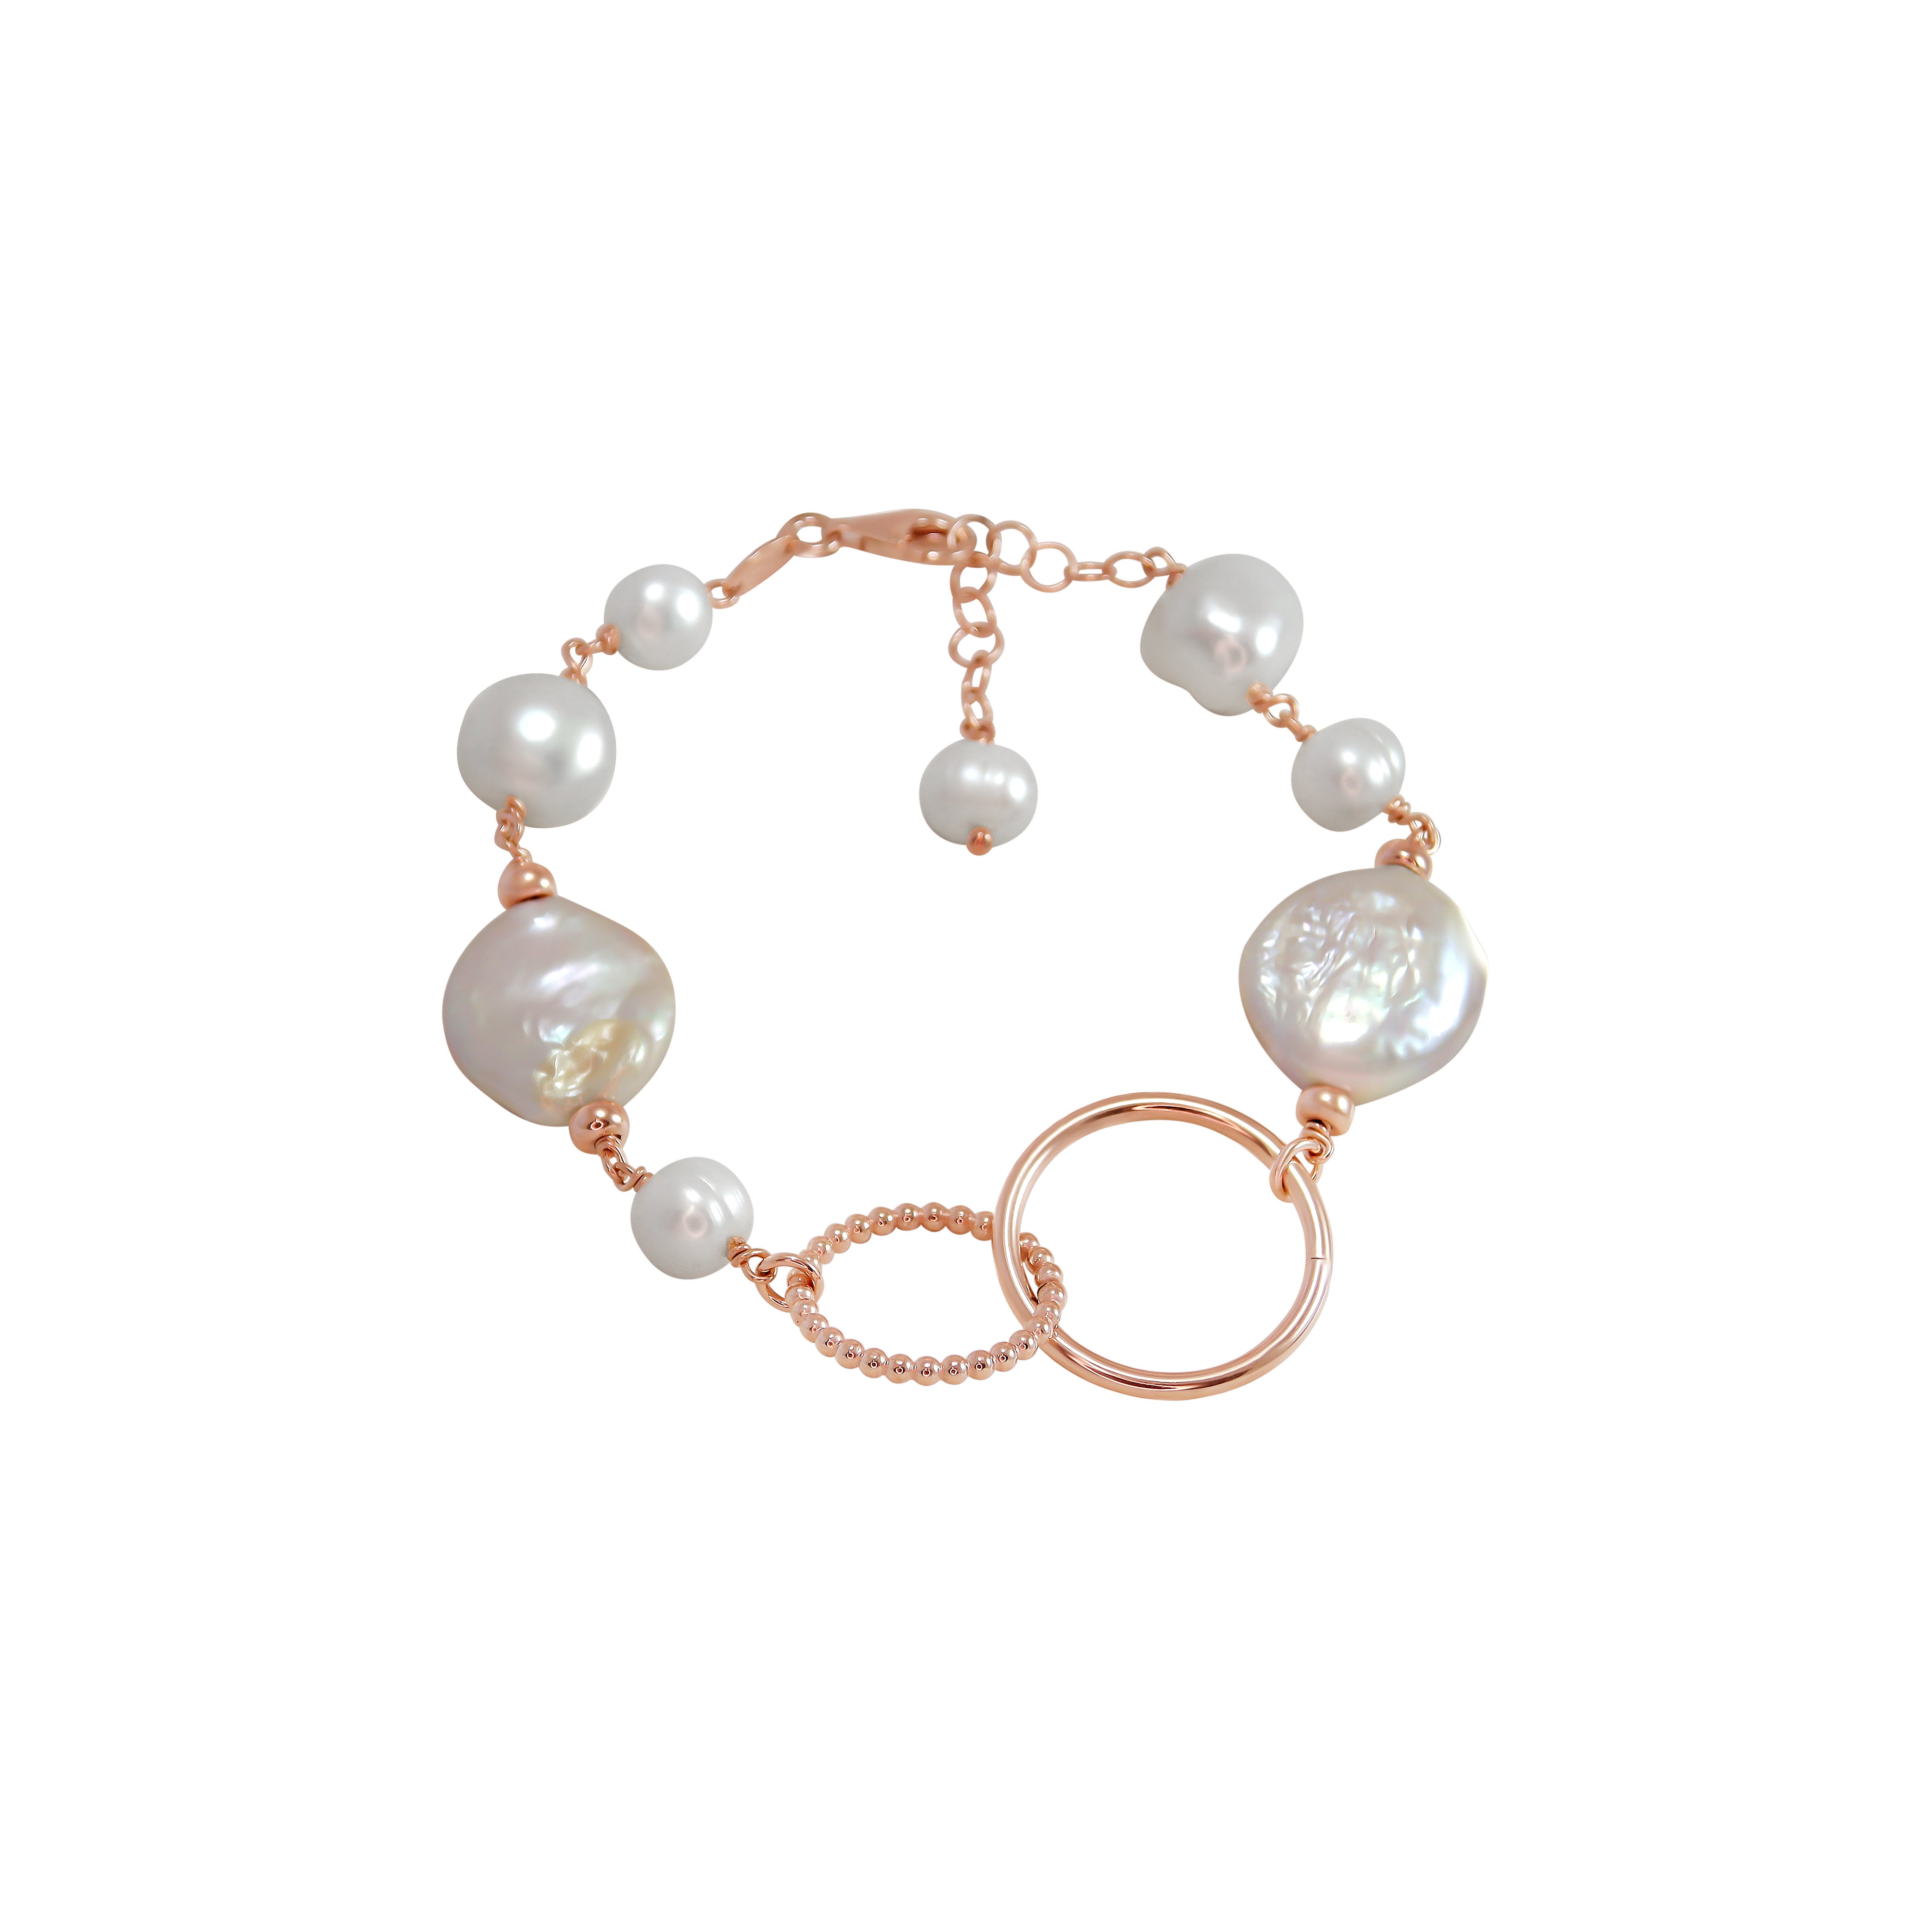 Pearl, Coin Pearl & Circle Link Bracelet